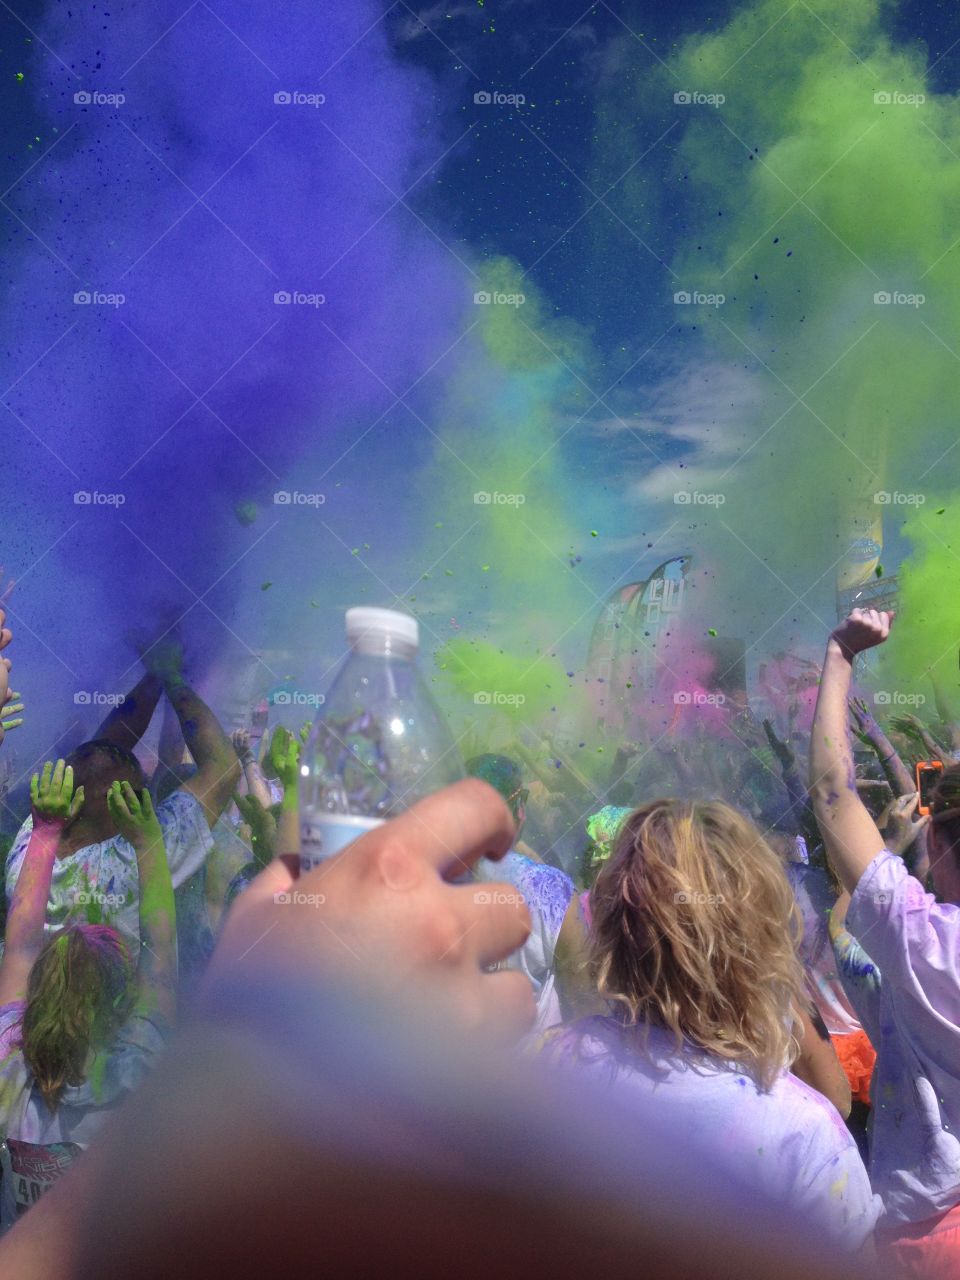 Colorvibe 2015 5K Fort Collins. Taken in Fort Collins, Colorado, during the ColorVibe 5K. 